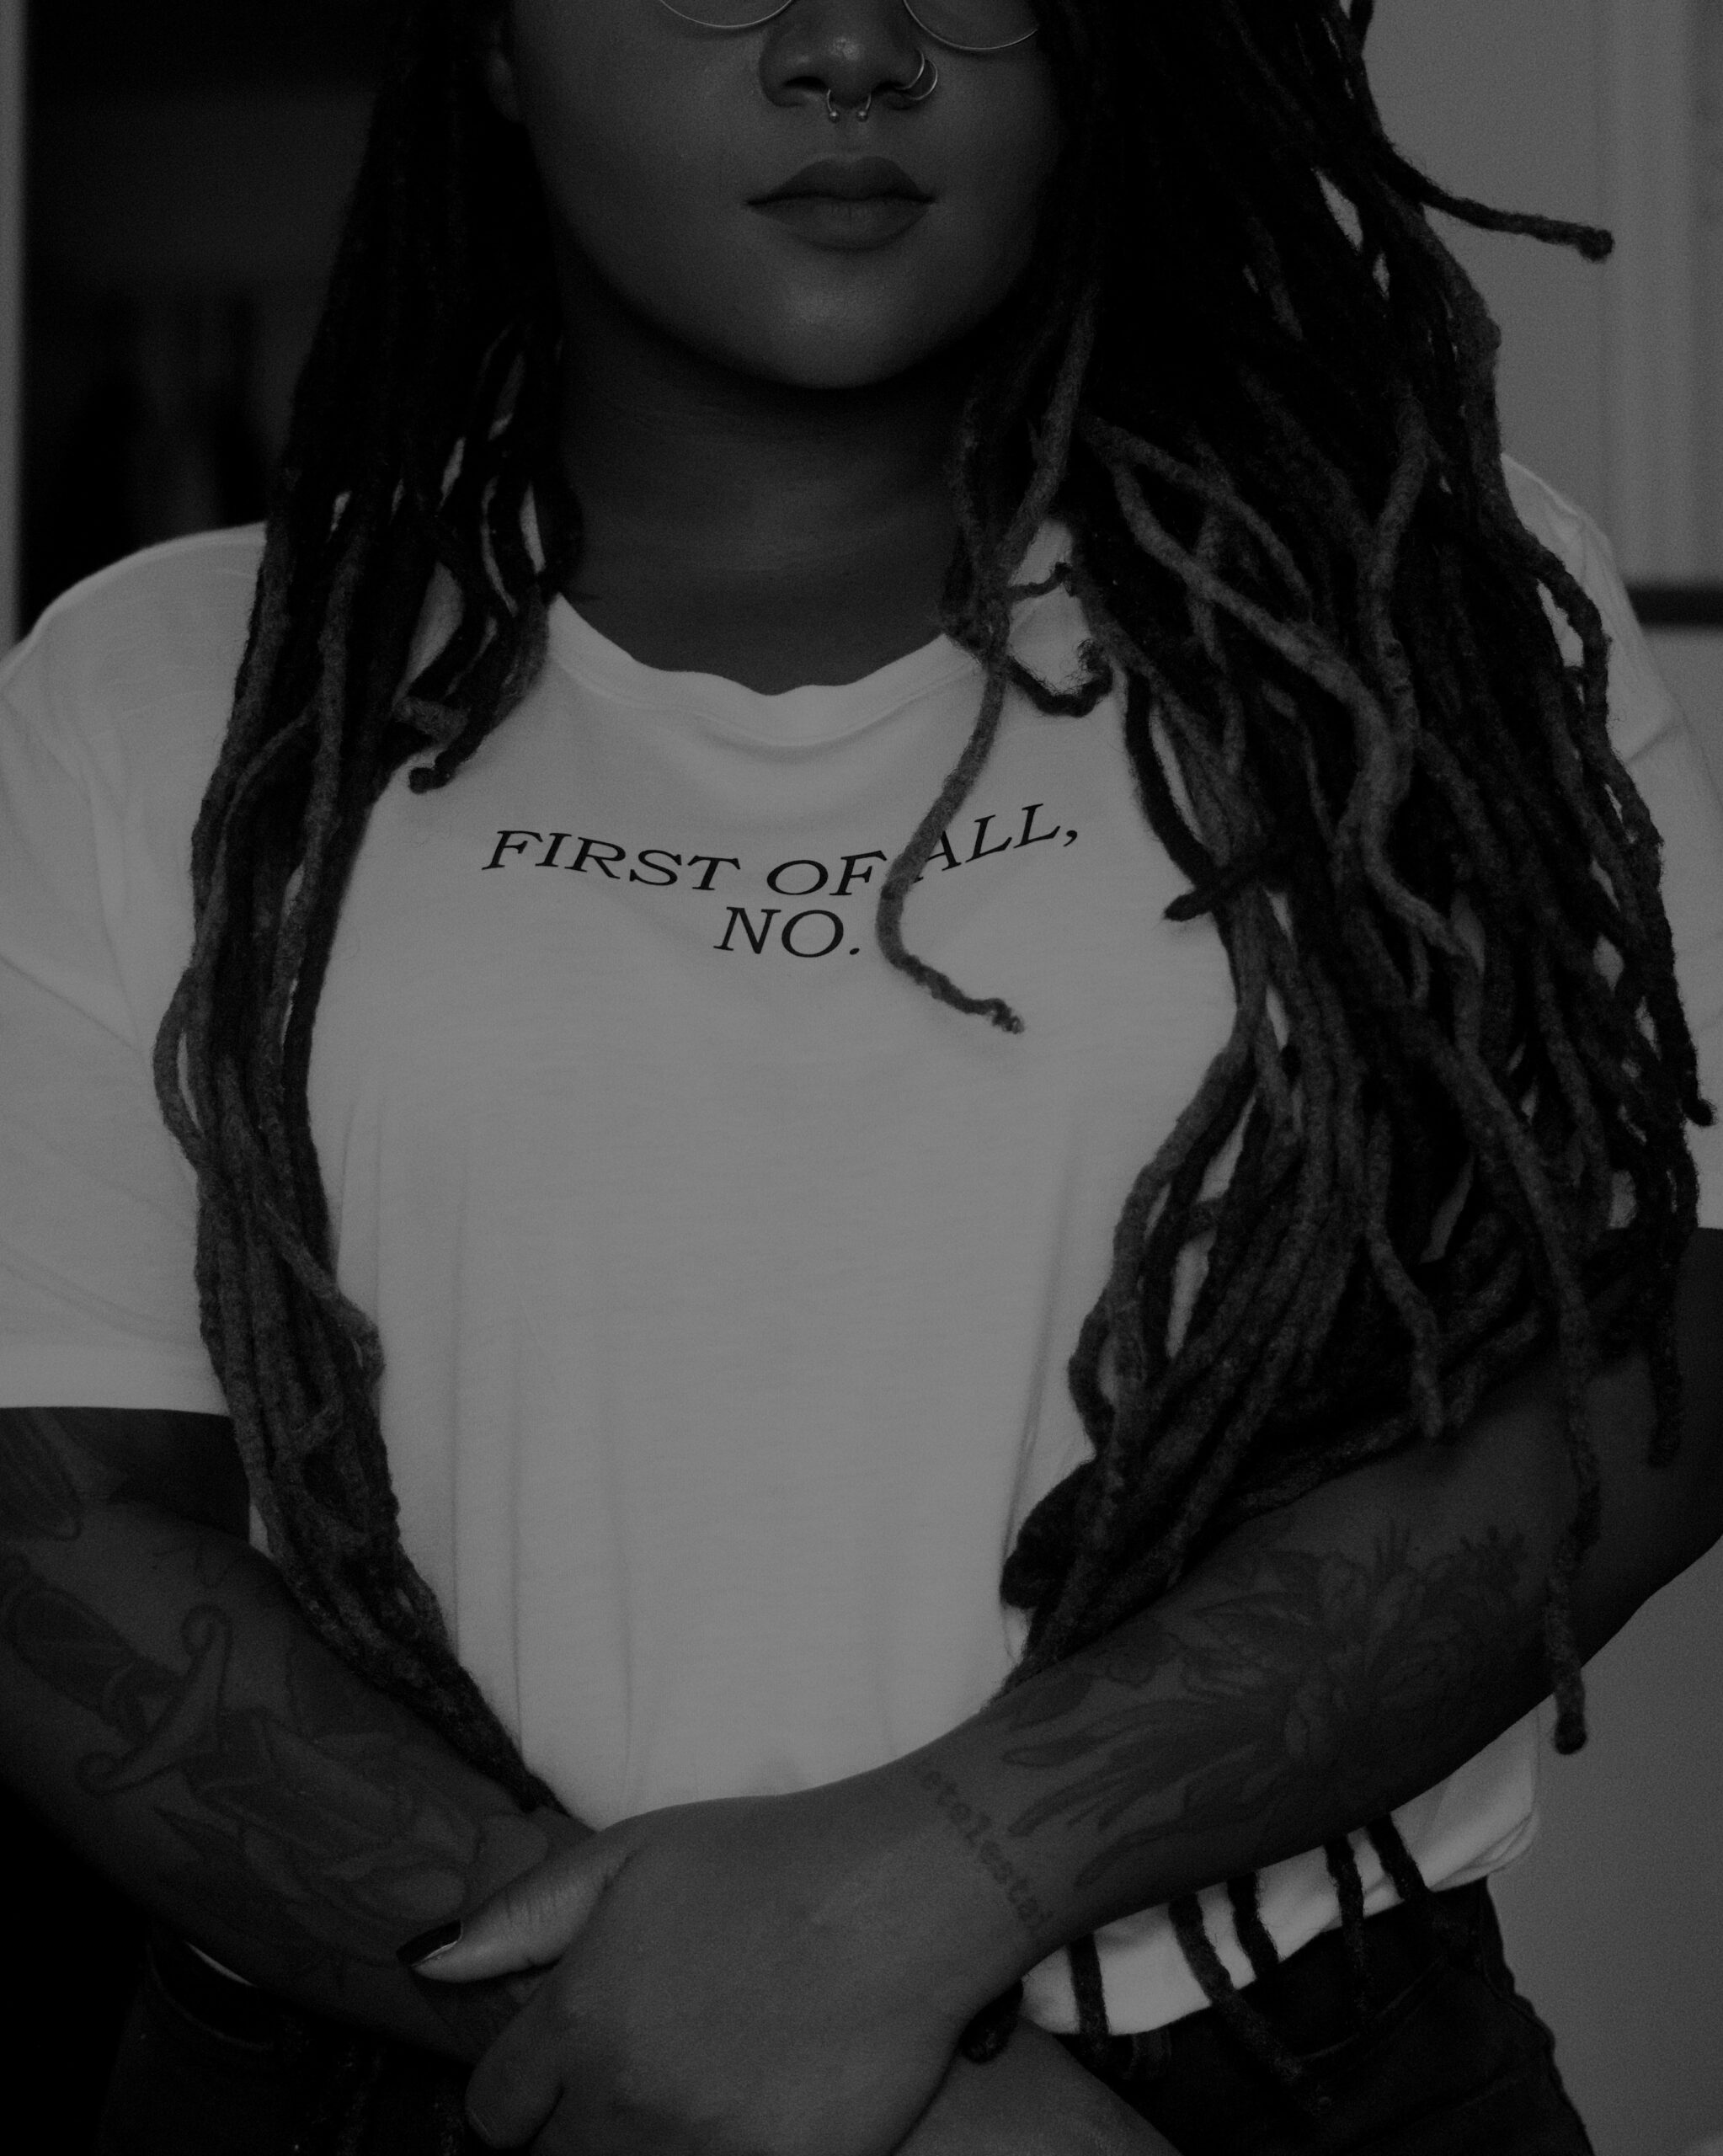 Black woman standing with her arms cross wearing shirt that says "first of all, no"